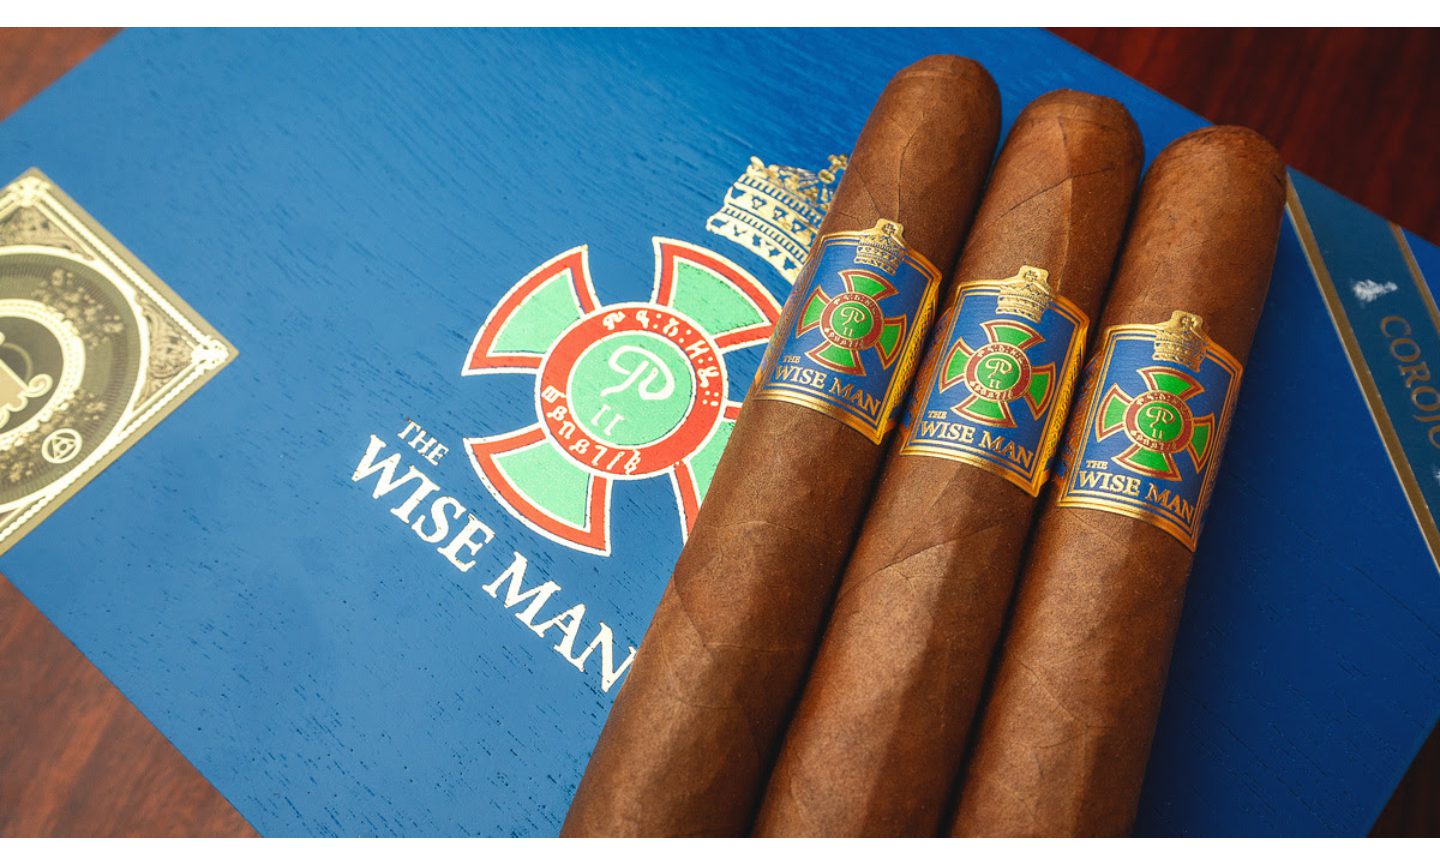 foundation-cigars-unveils-the-wise-man-corojo-and-maduro